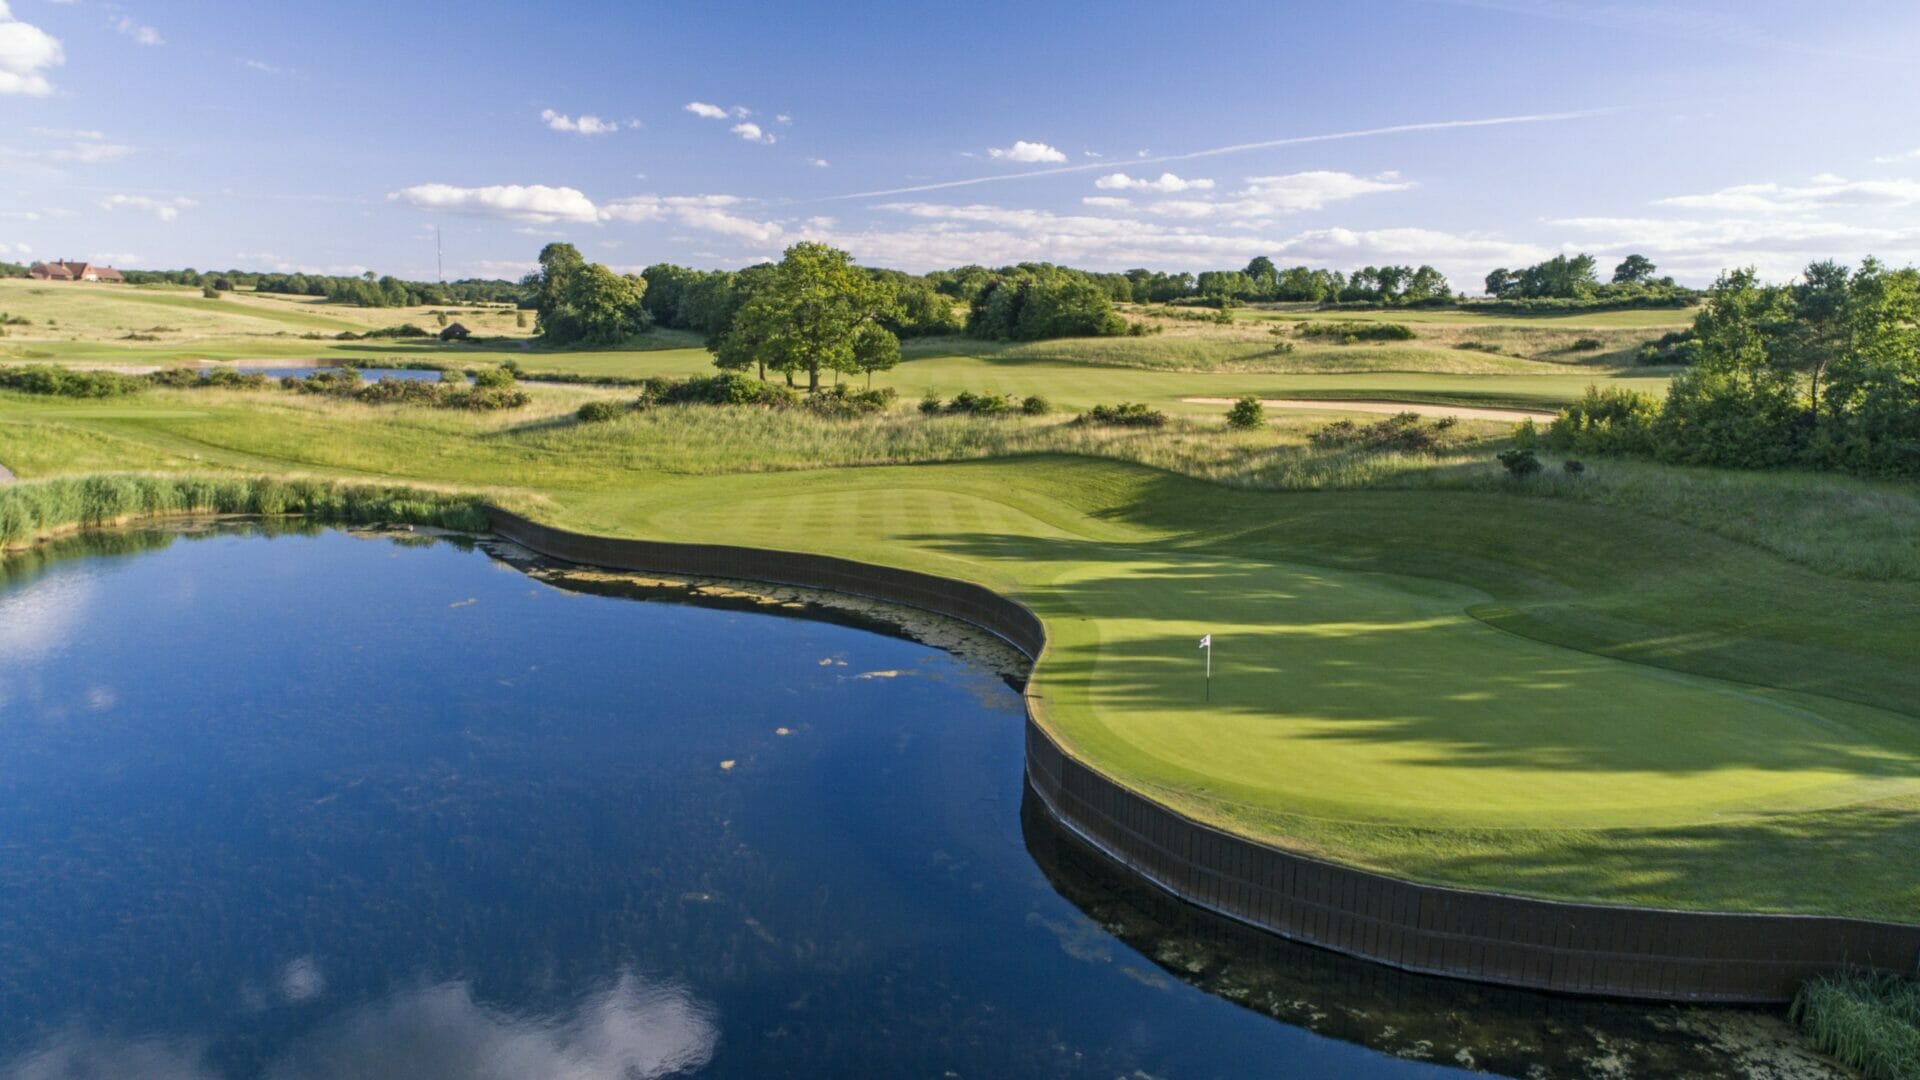 London Golf Club has grasped its moment as it returned to the European Tour limelight once again.